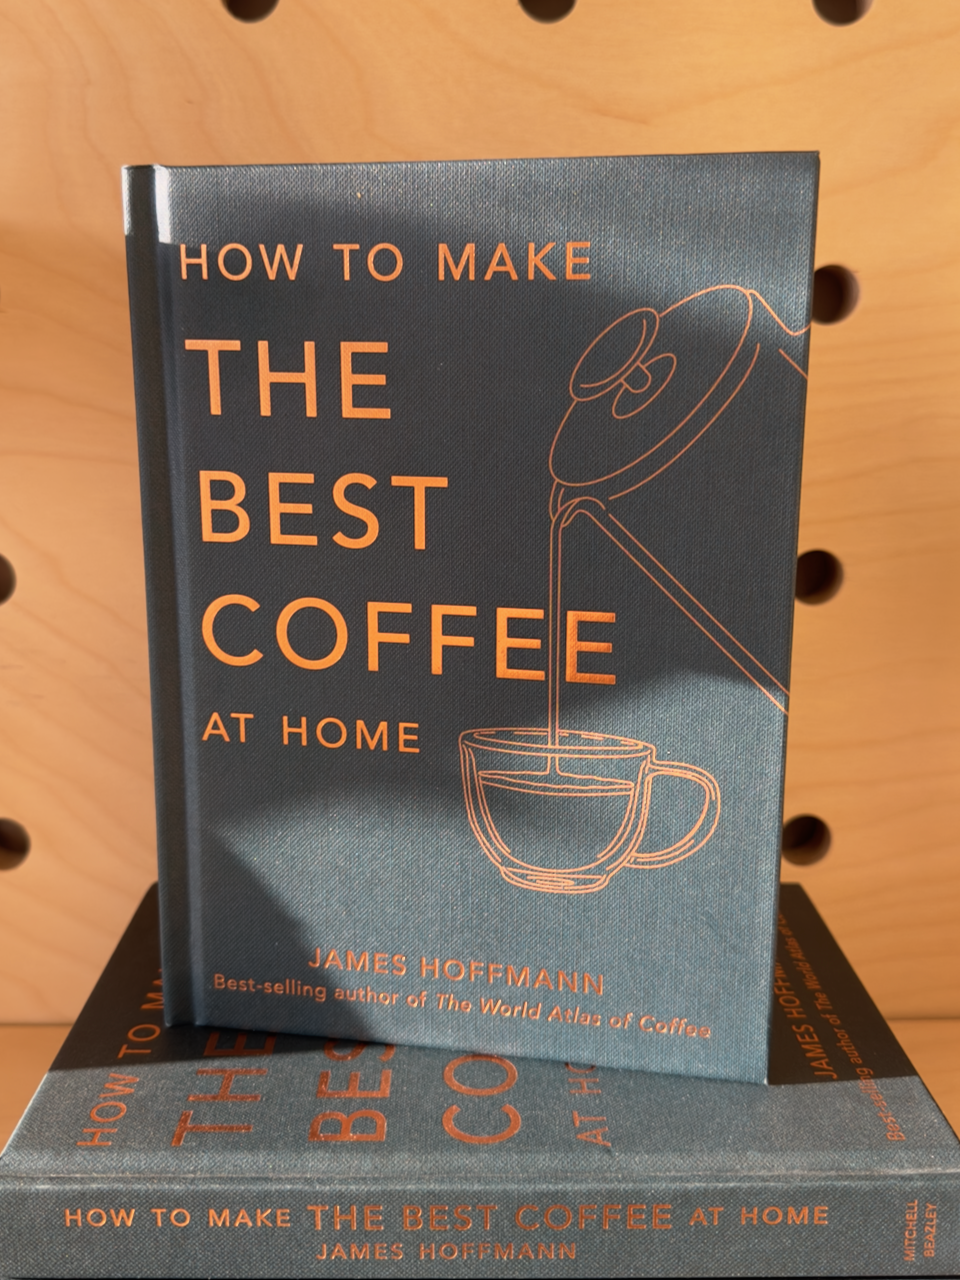 How to Enjoy Your Coffee More at Home & Work : 4 Steps - Instructables